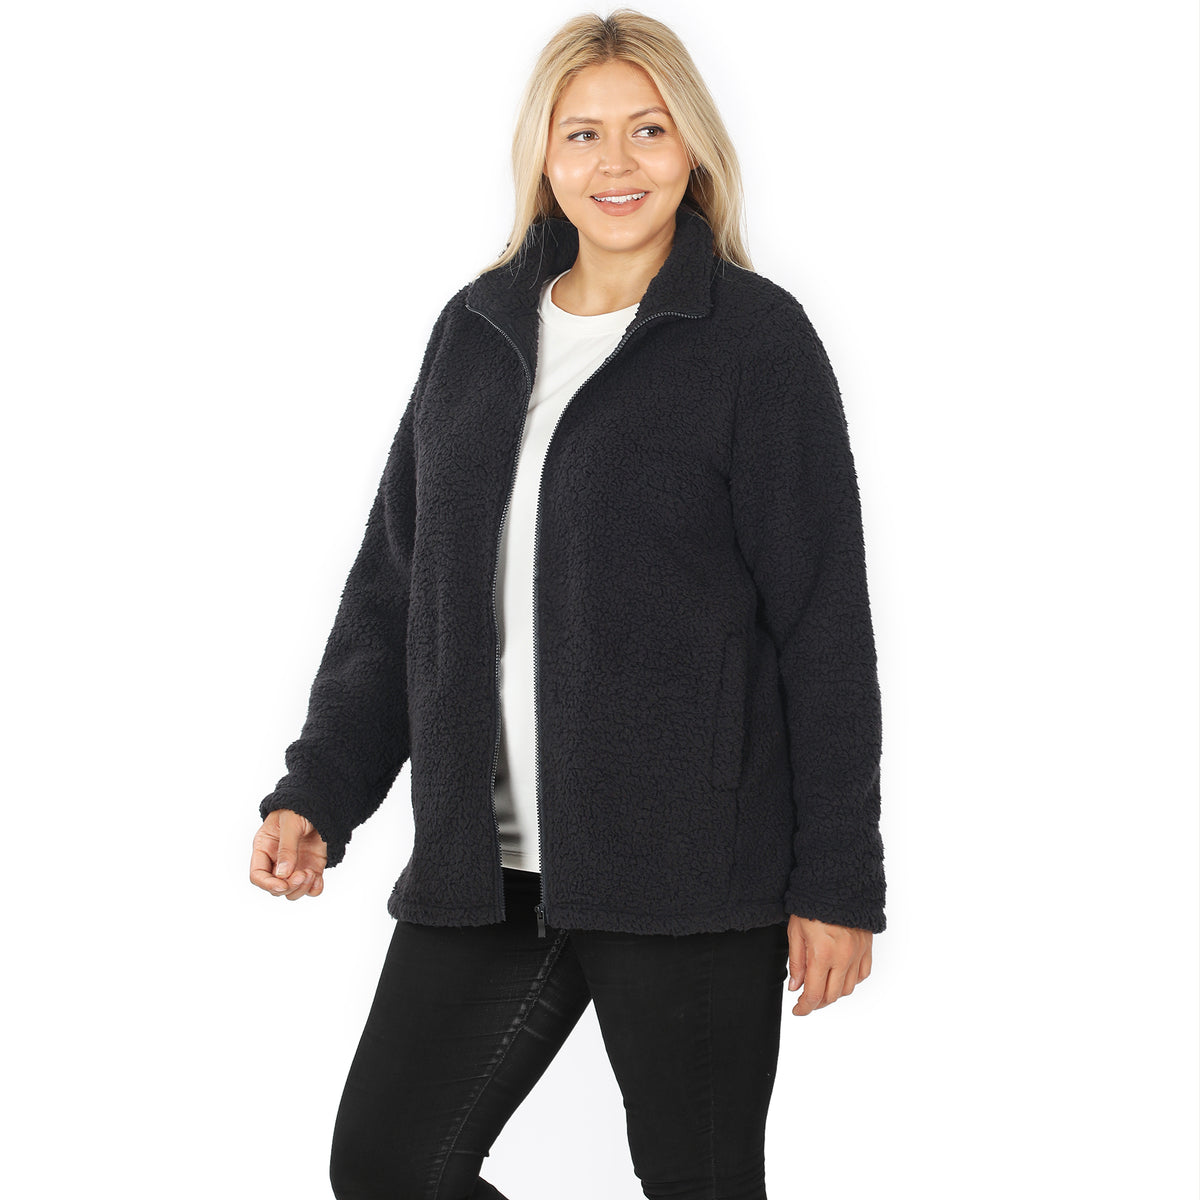 Cozette Sherpa Jacket with Pockets